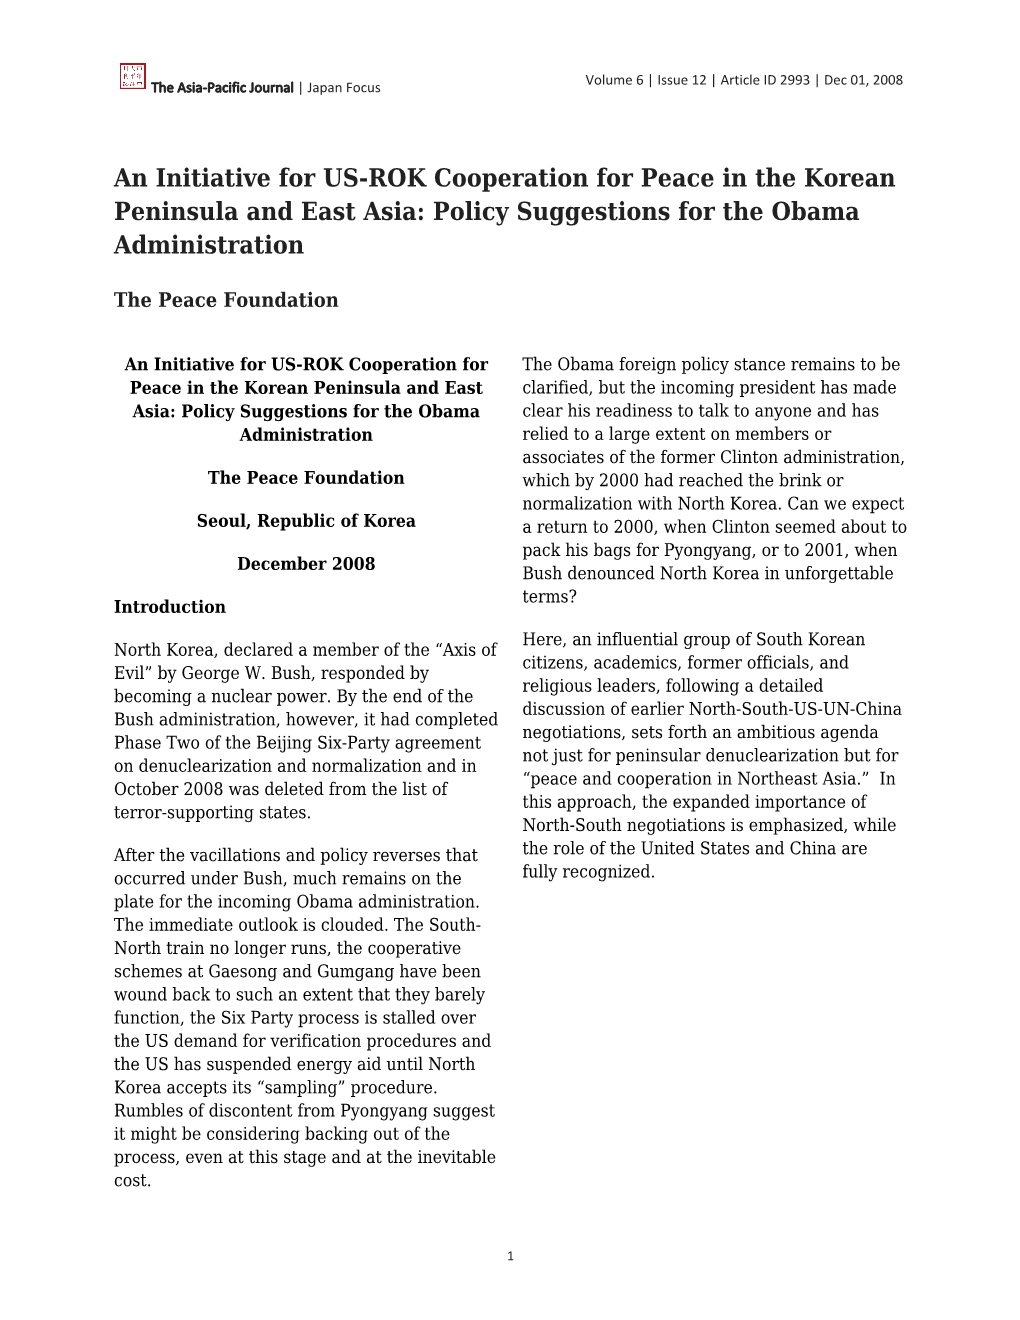 An Initiative for US-ROK Cooperation for Peace in the Korean Peninsula and East Asia: Policy Suggestions for the Obama Administration